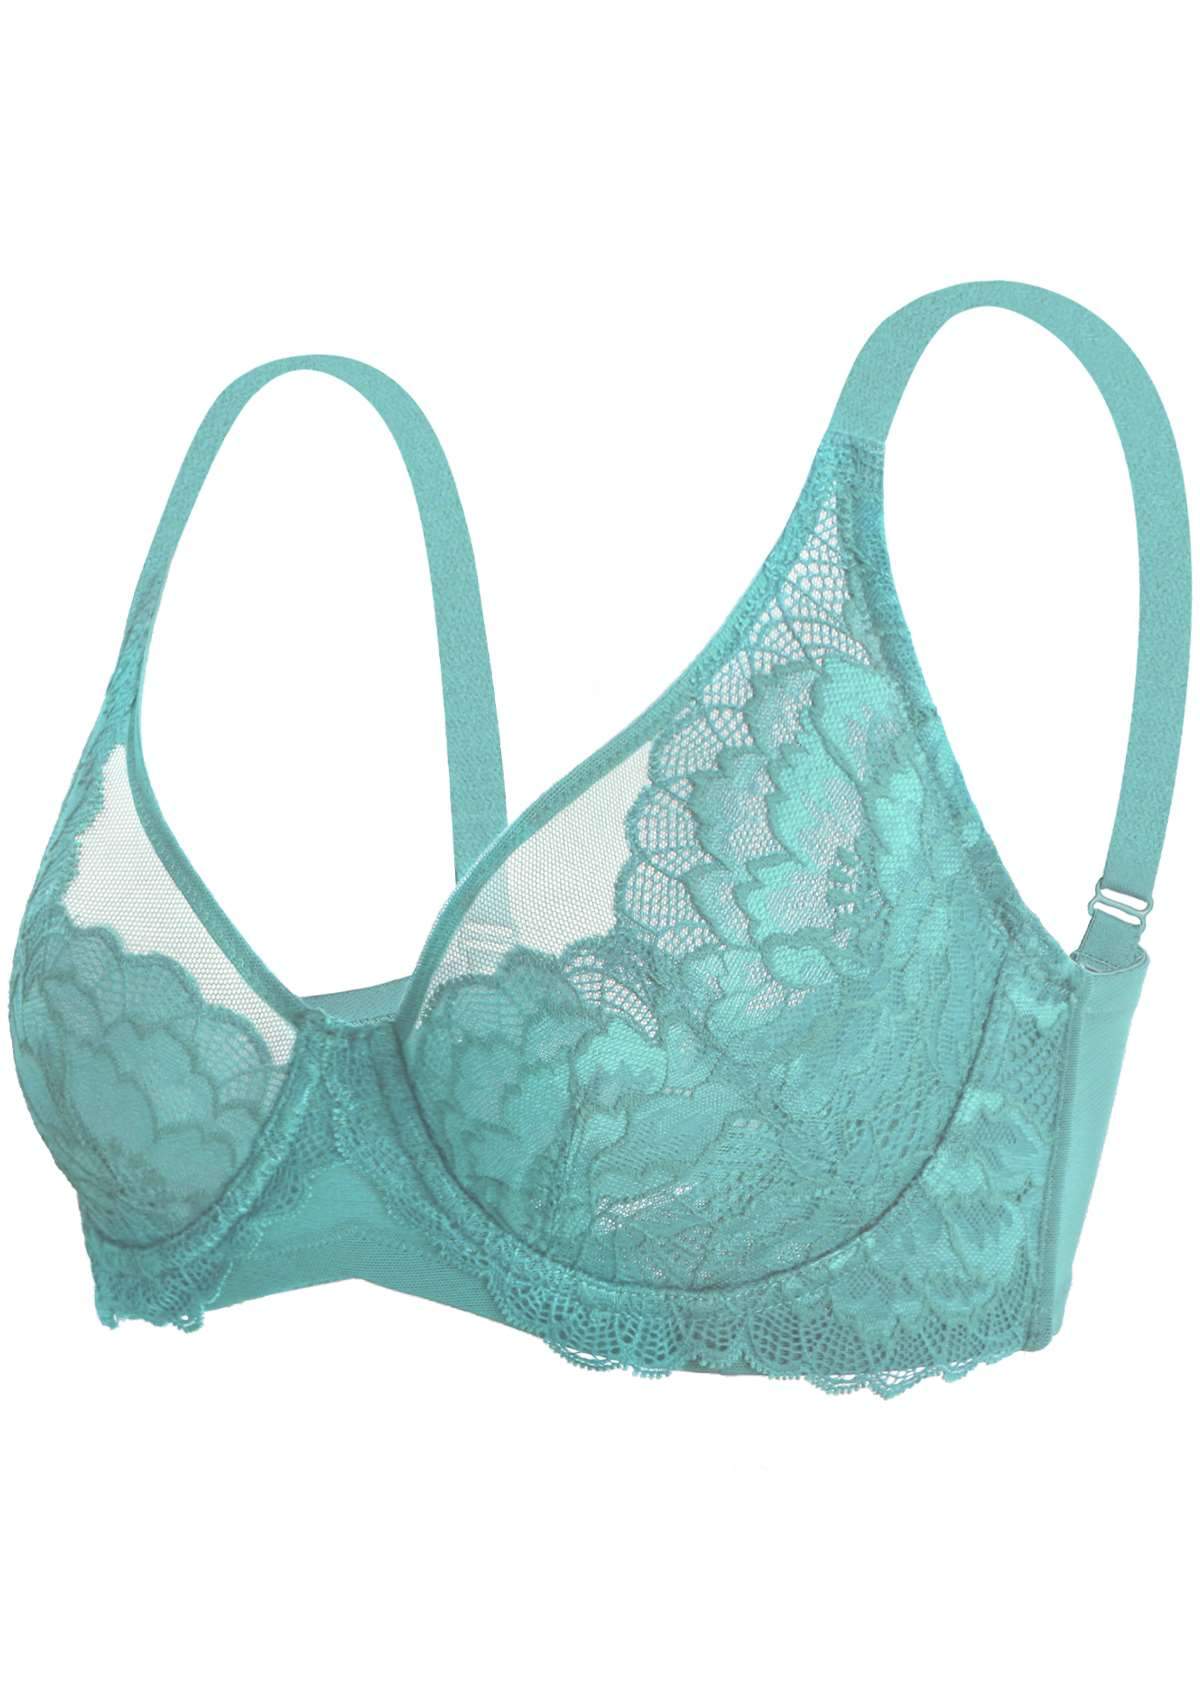 HSIA Paeonia Lace Full Coverage Underwire Non-Padded Uplifting Bra - Teal / 34 / C